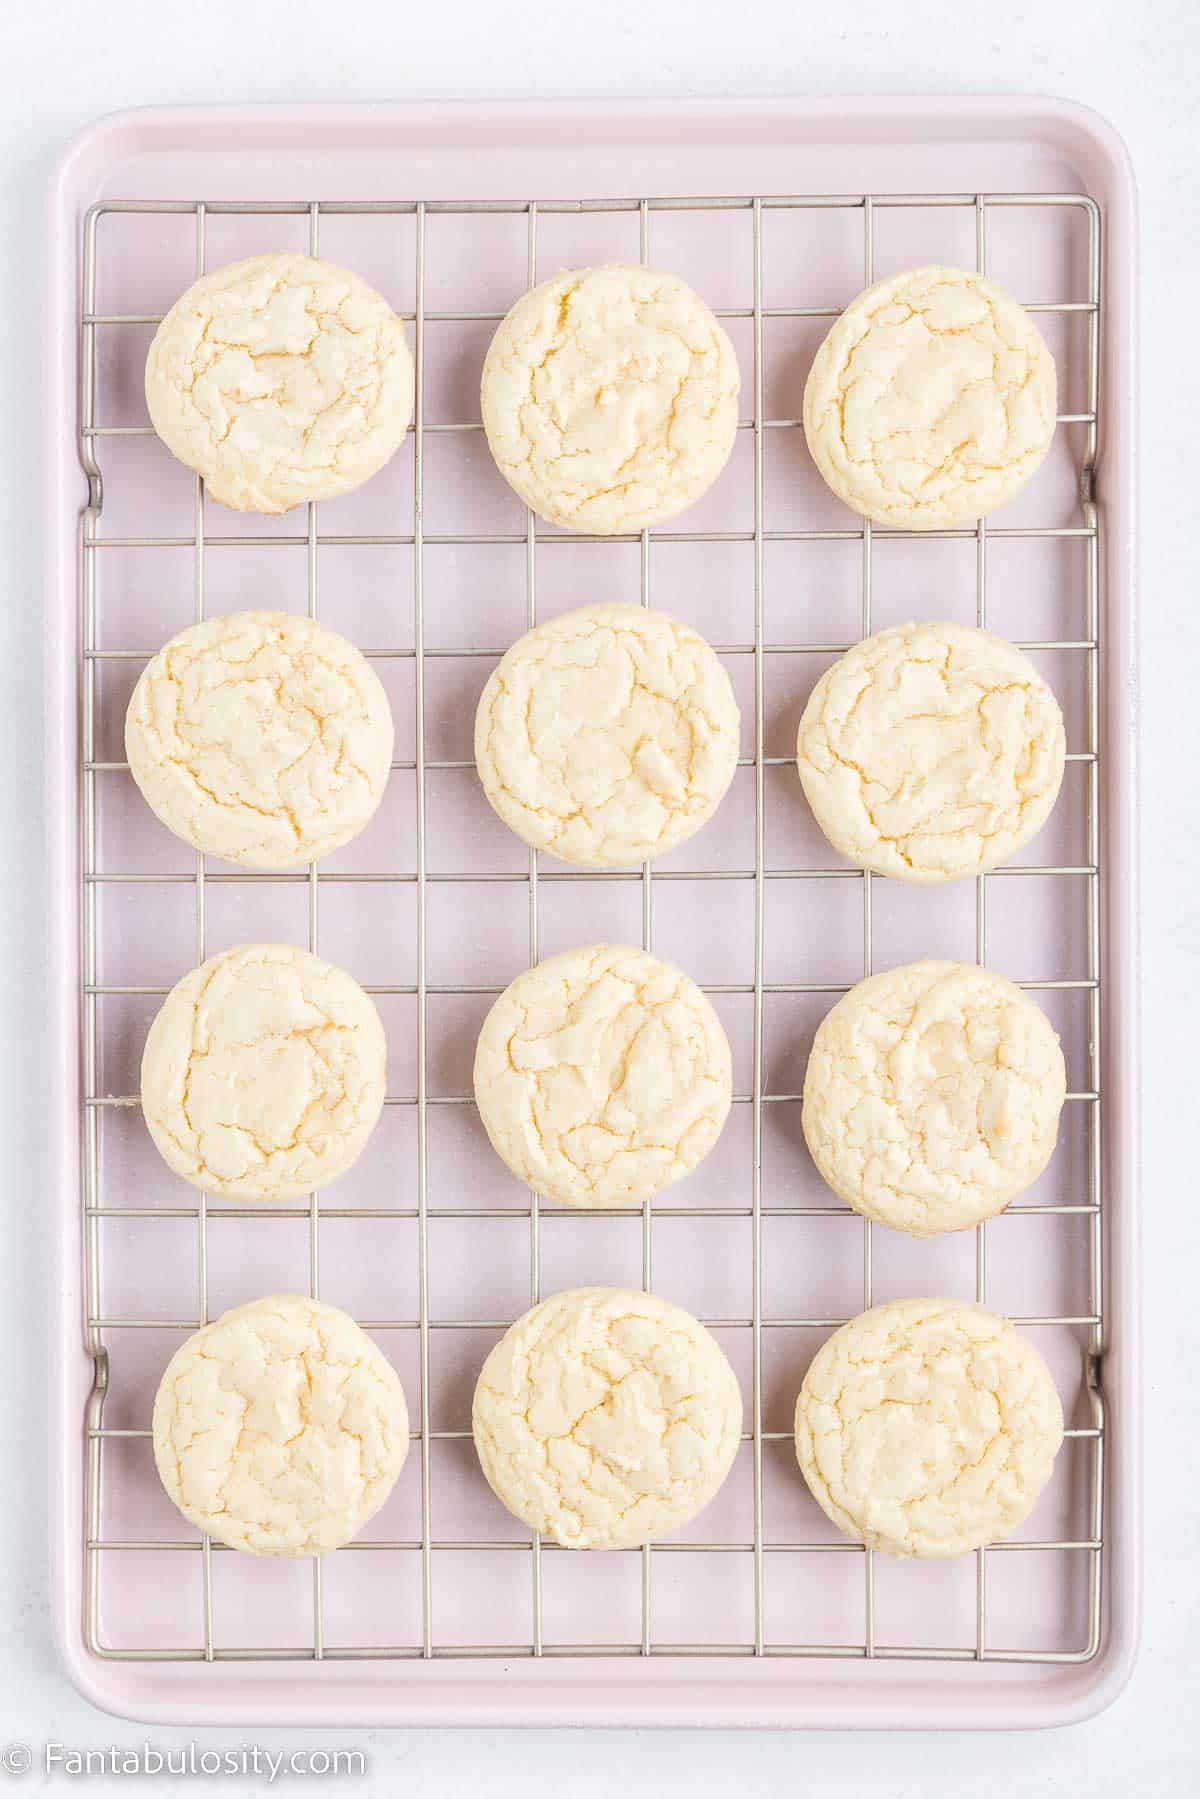 Baked cake mix cookies, cooling on cooling rack.